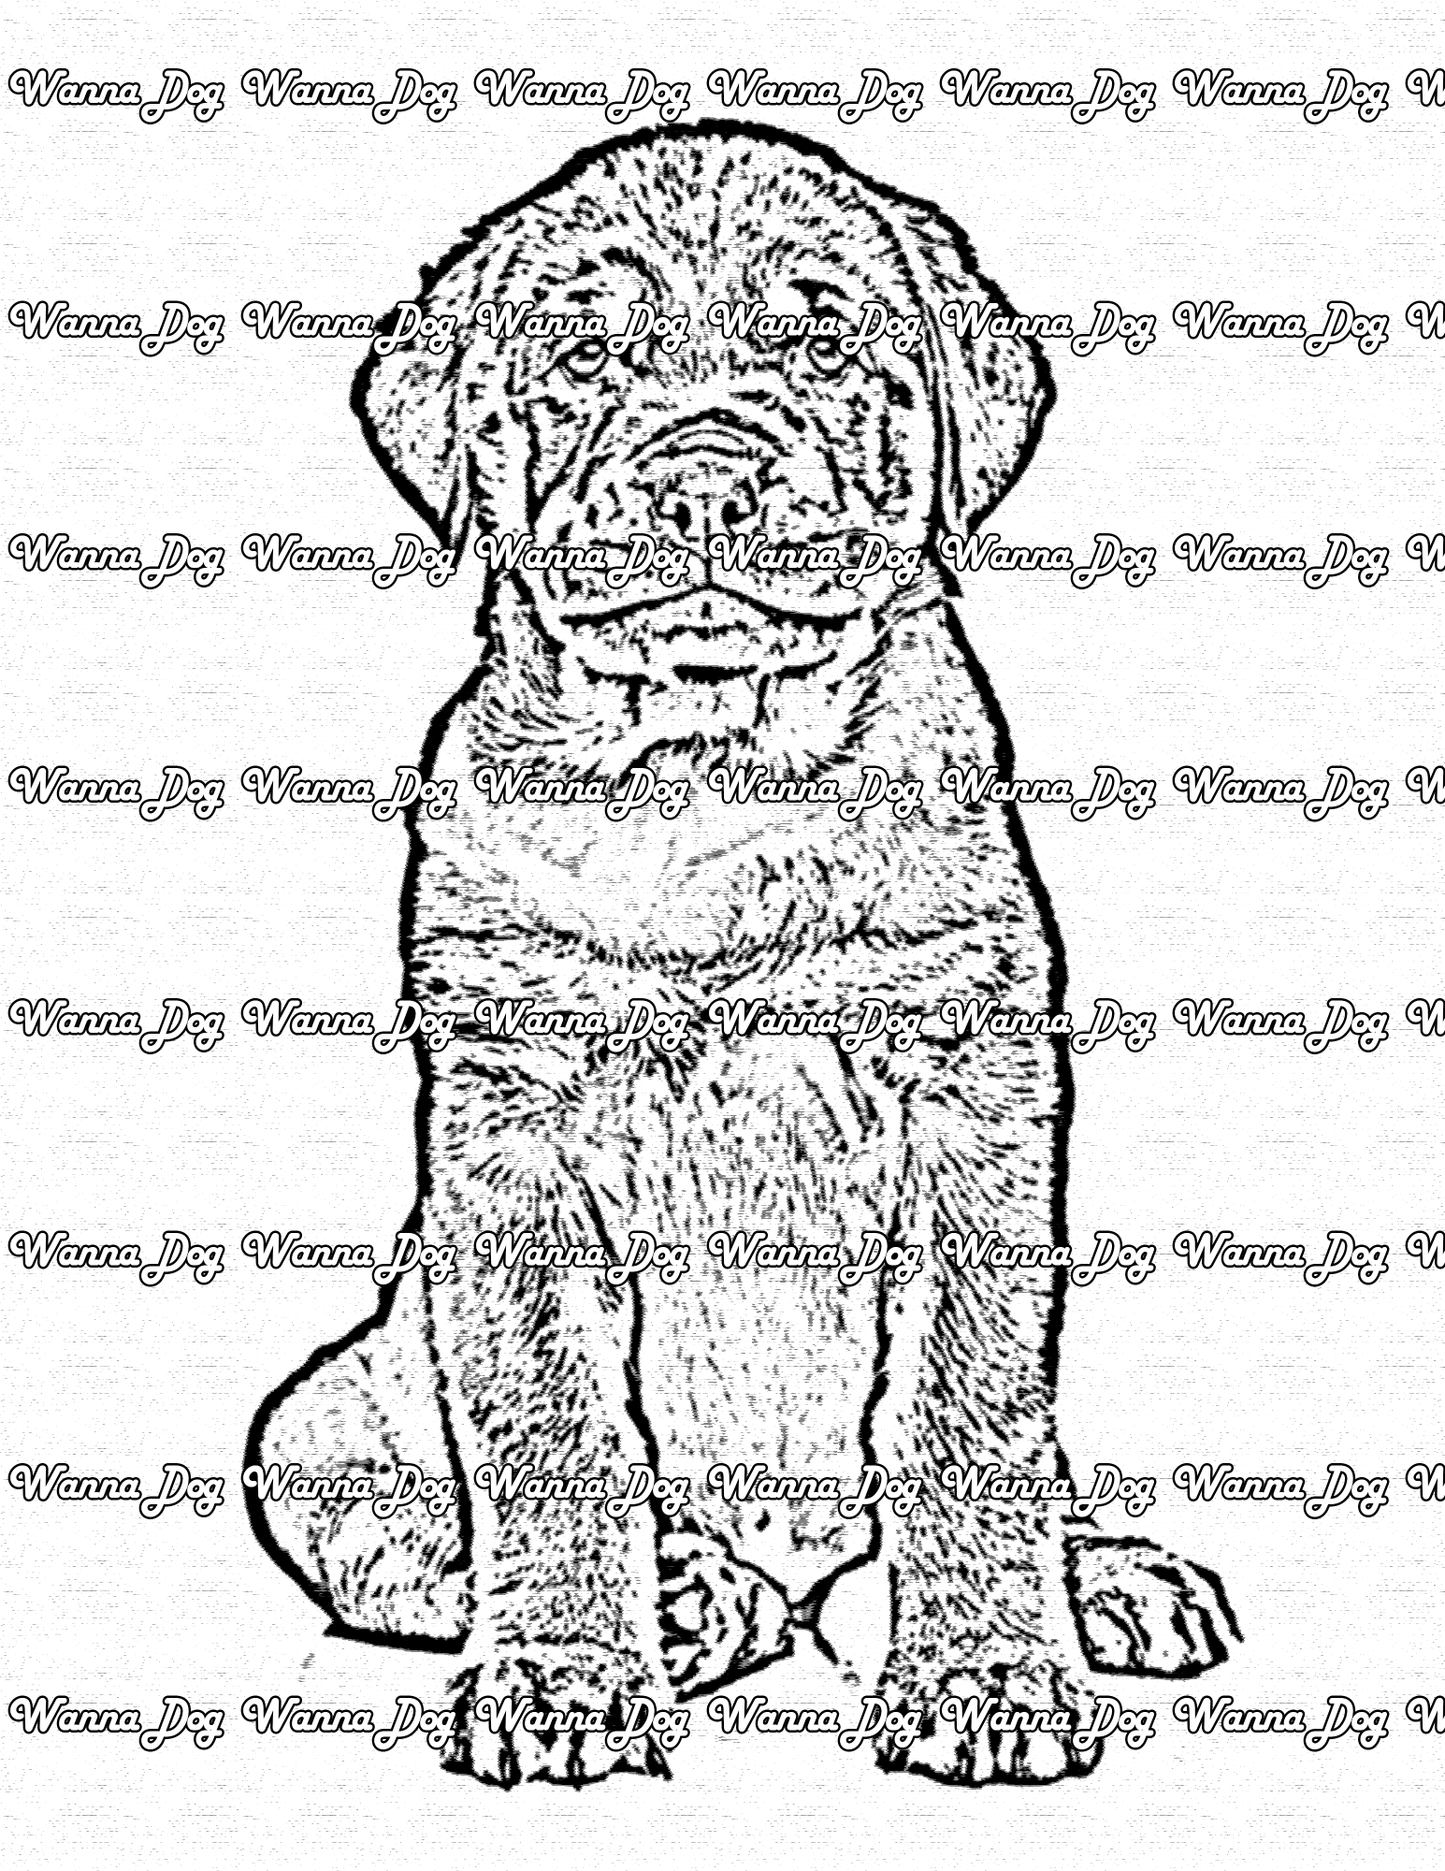 Rottweiler Coloring Page of a Rottweiler puppy sitting